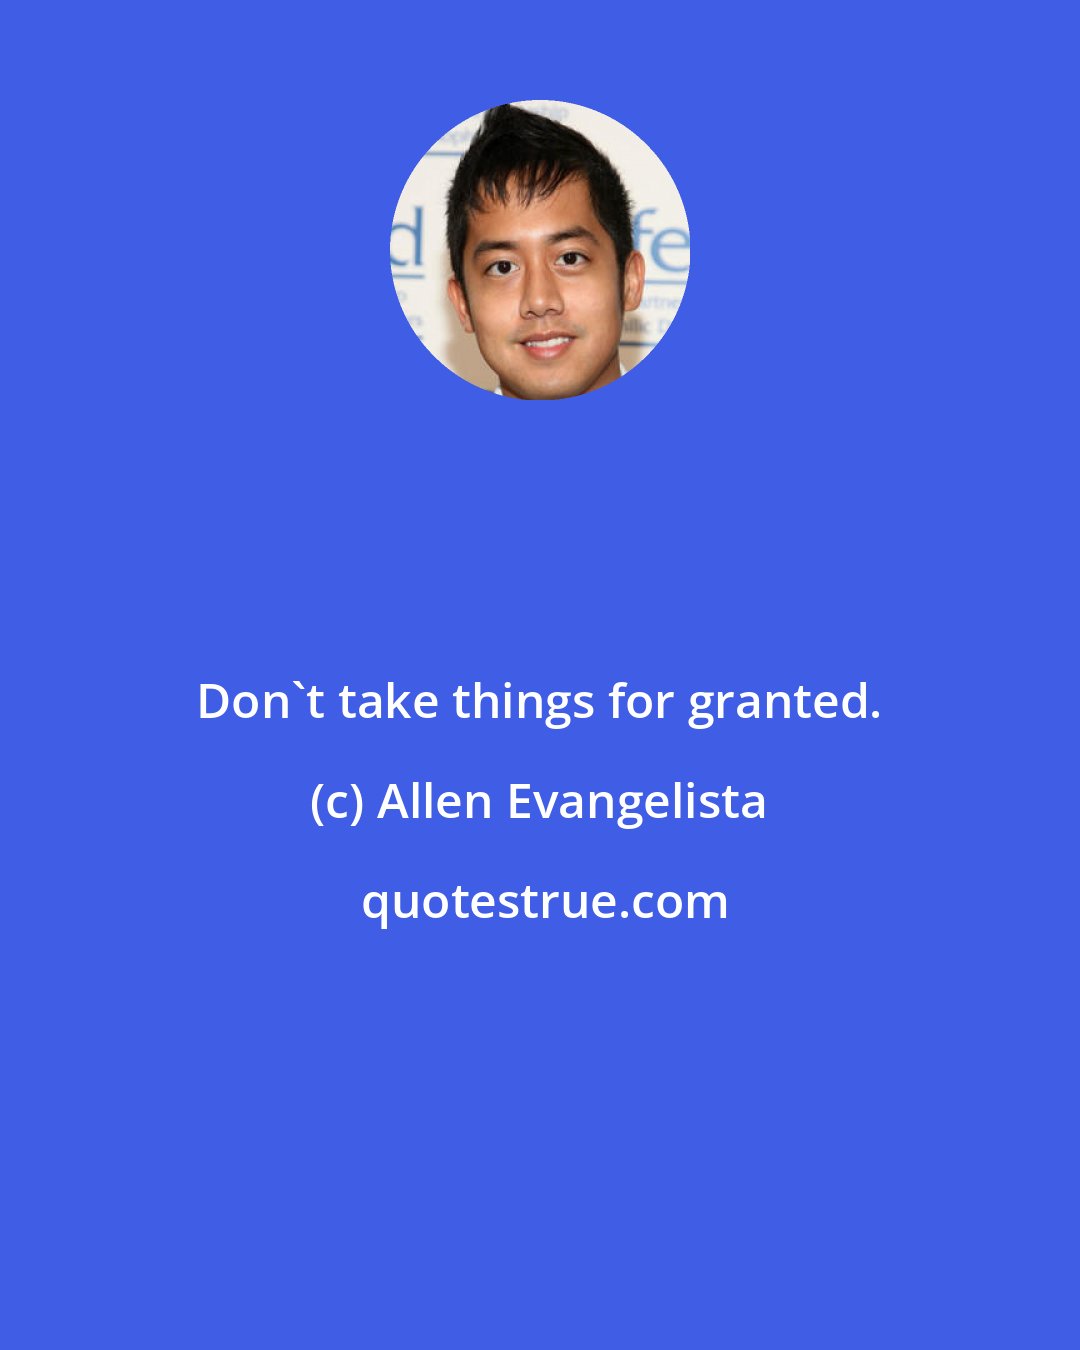 Allen Evangelista: Don't take things for granted.